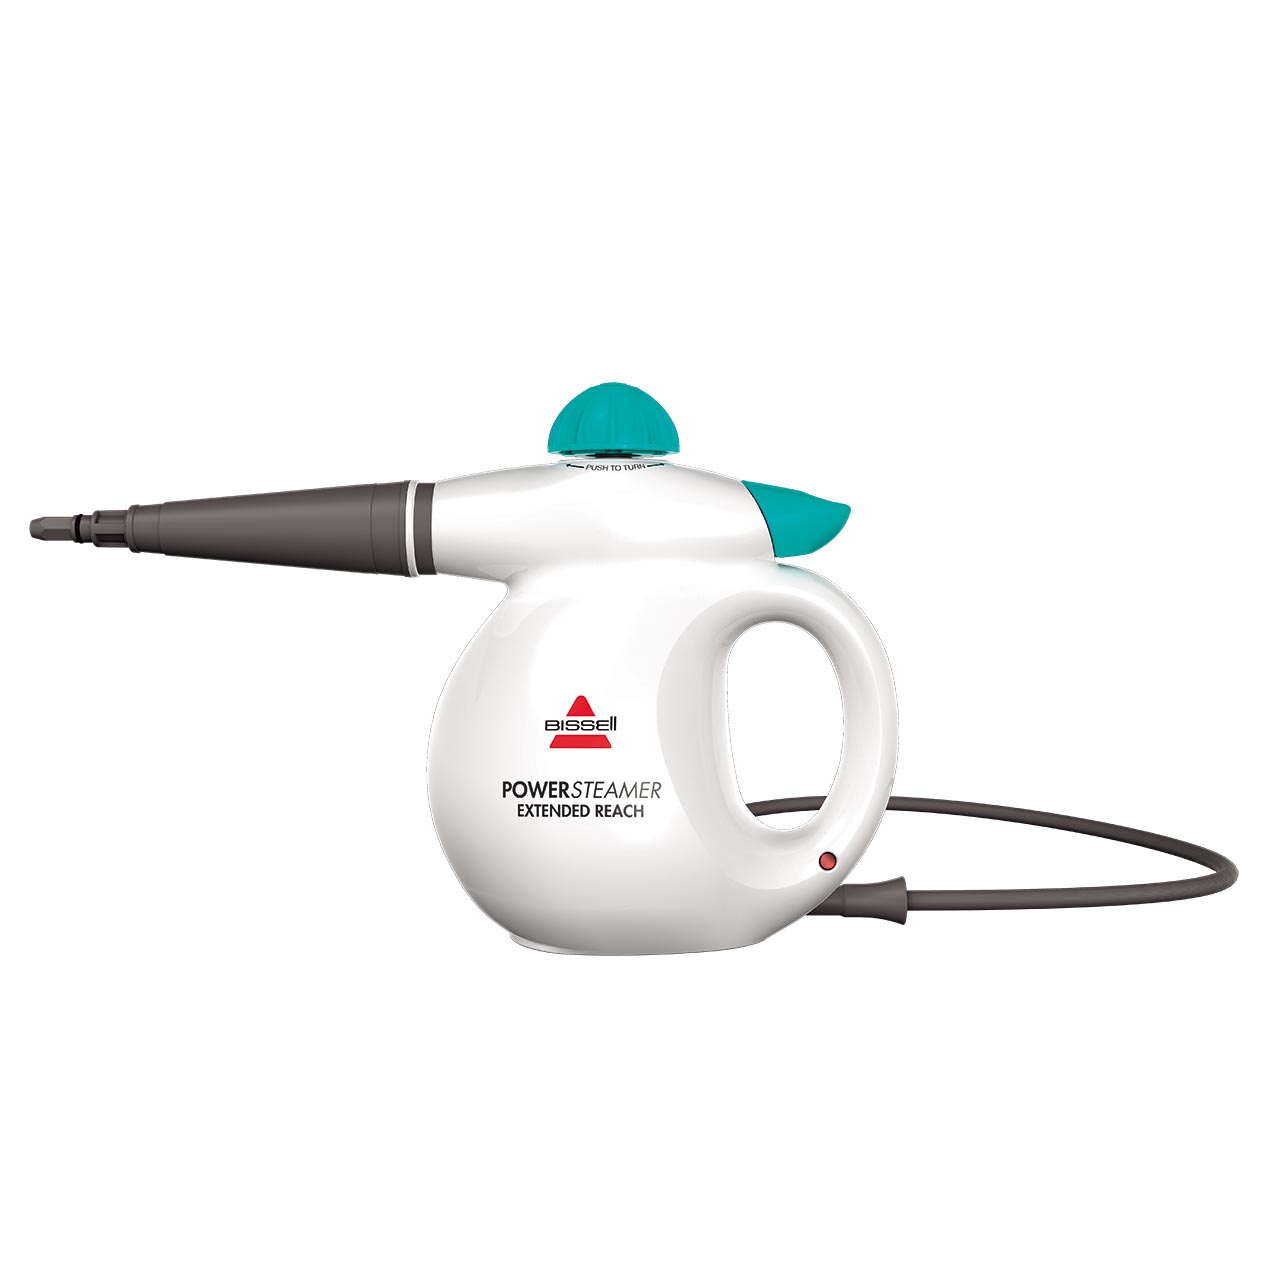 BISSELL Powersteamer Extended Reach Hand Held Steamer - 2994W - image 2 of 9